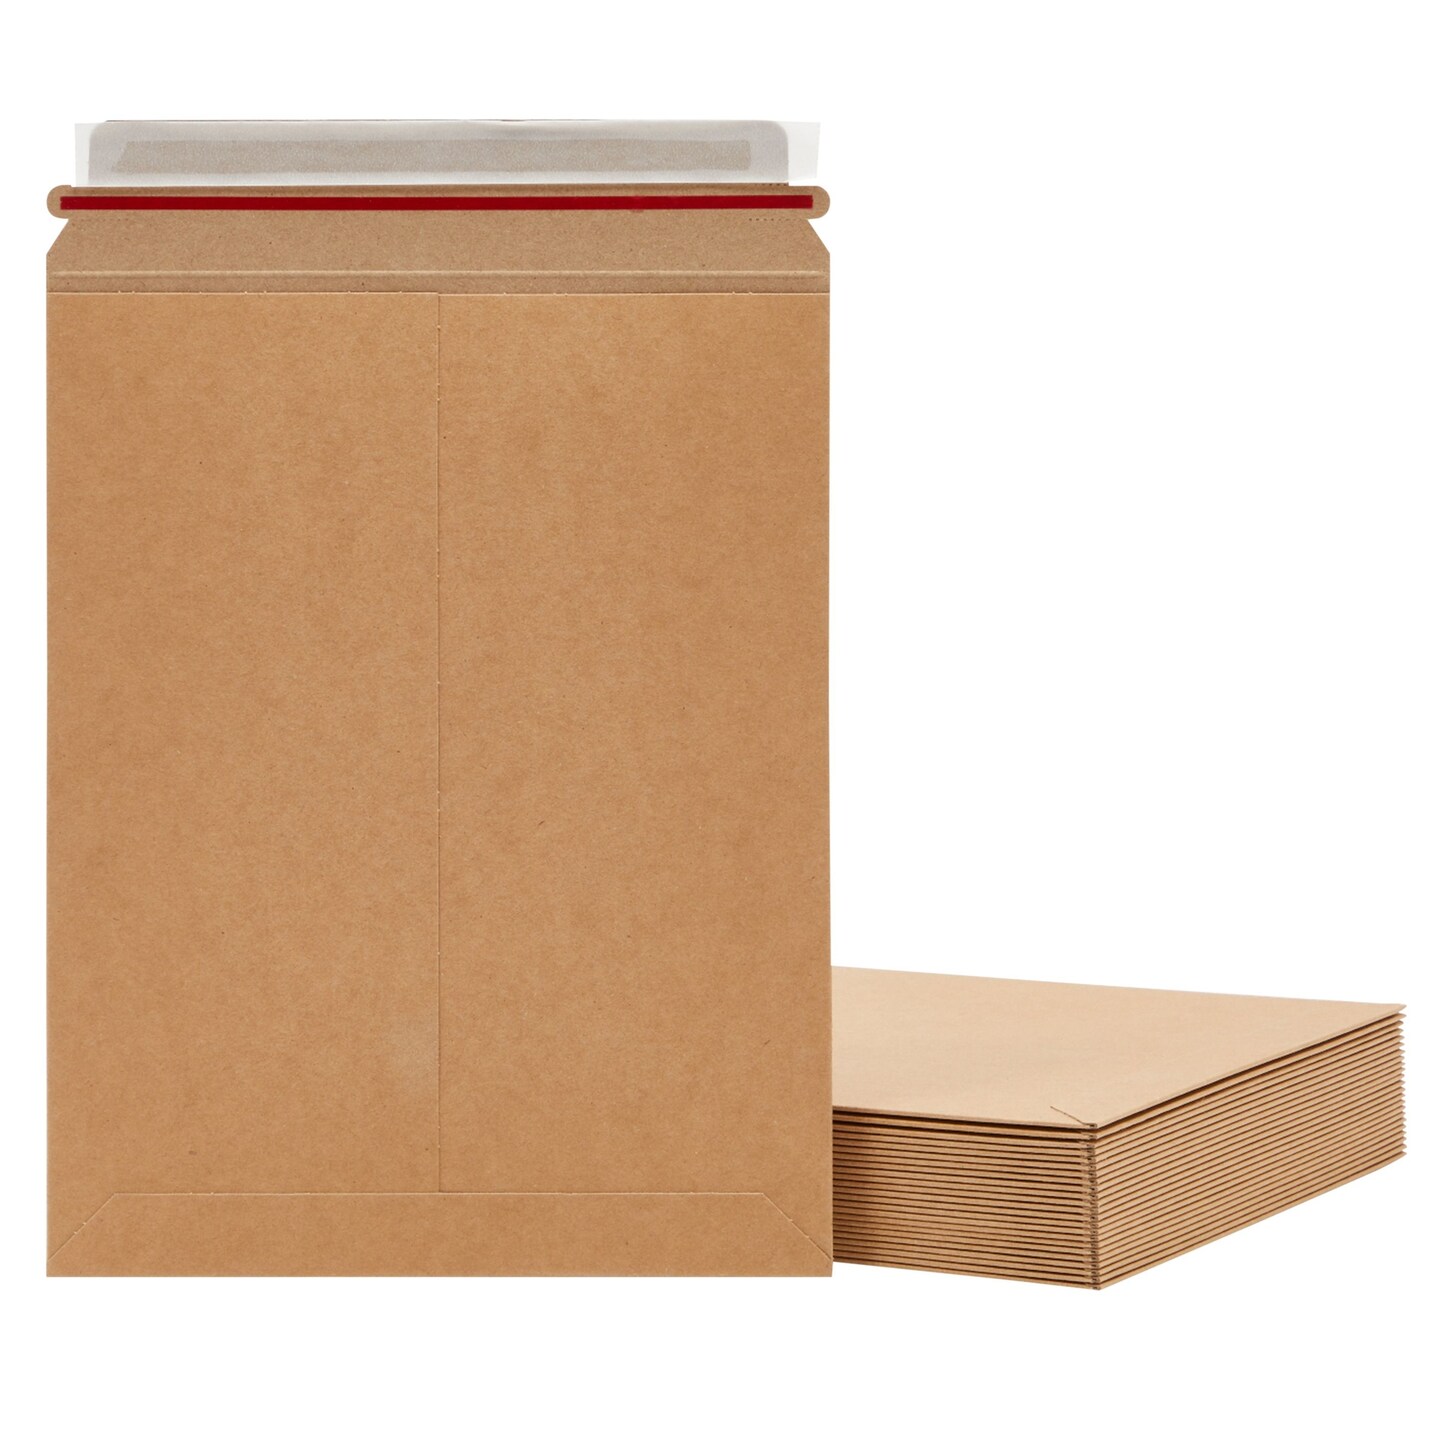 25 Photo Picture Album Paper Box, Flat Shipping Boxes, Cardboard